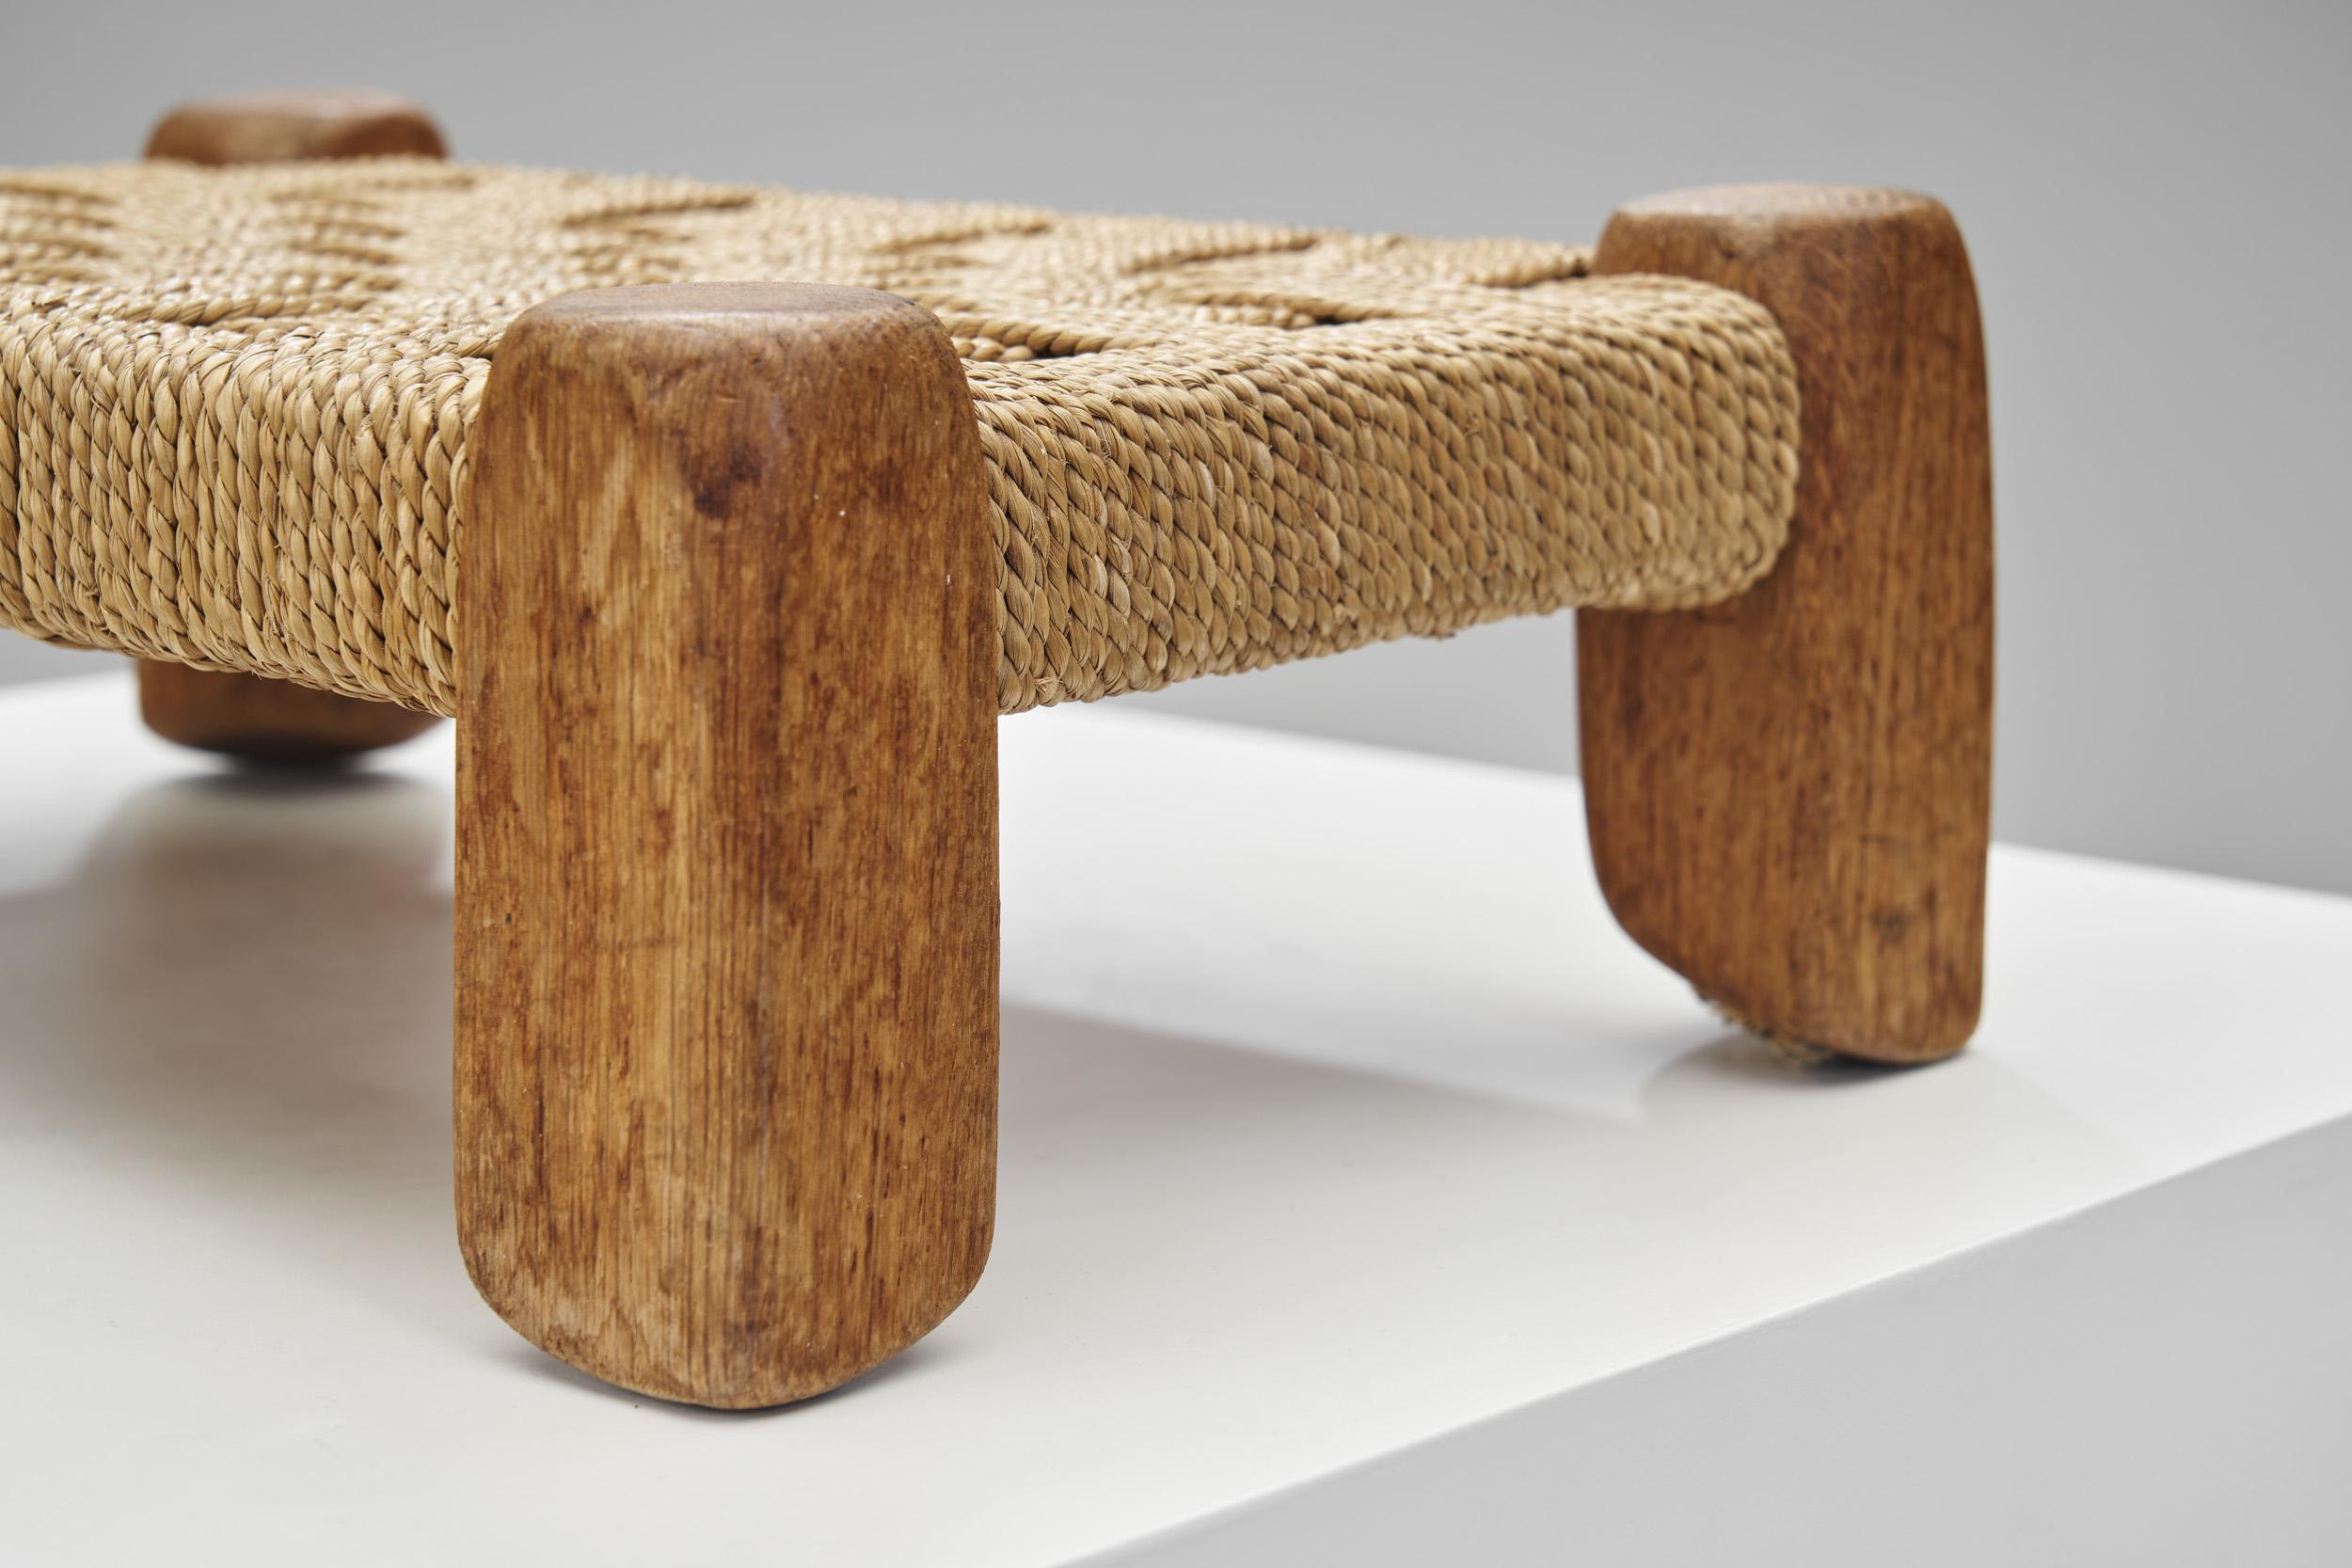 Woven Rush and Wood Stool, Europe ca 1950s For Sale 5